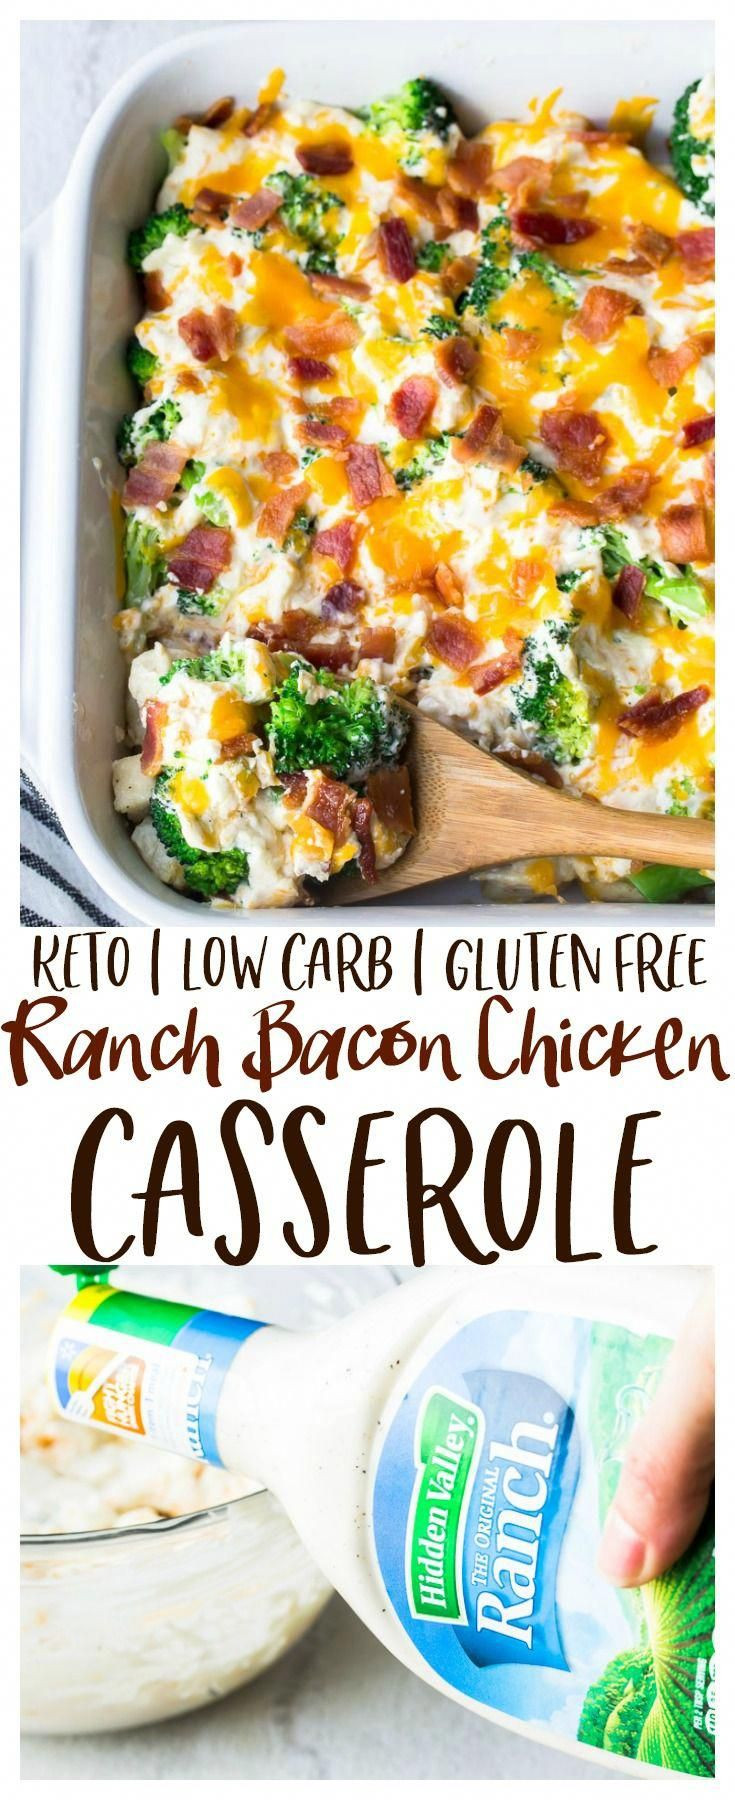 Clean Keto Casserole Recipes
 Pin by Megan English on Low carb t in 2020